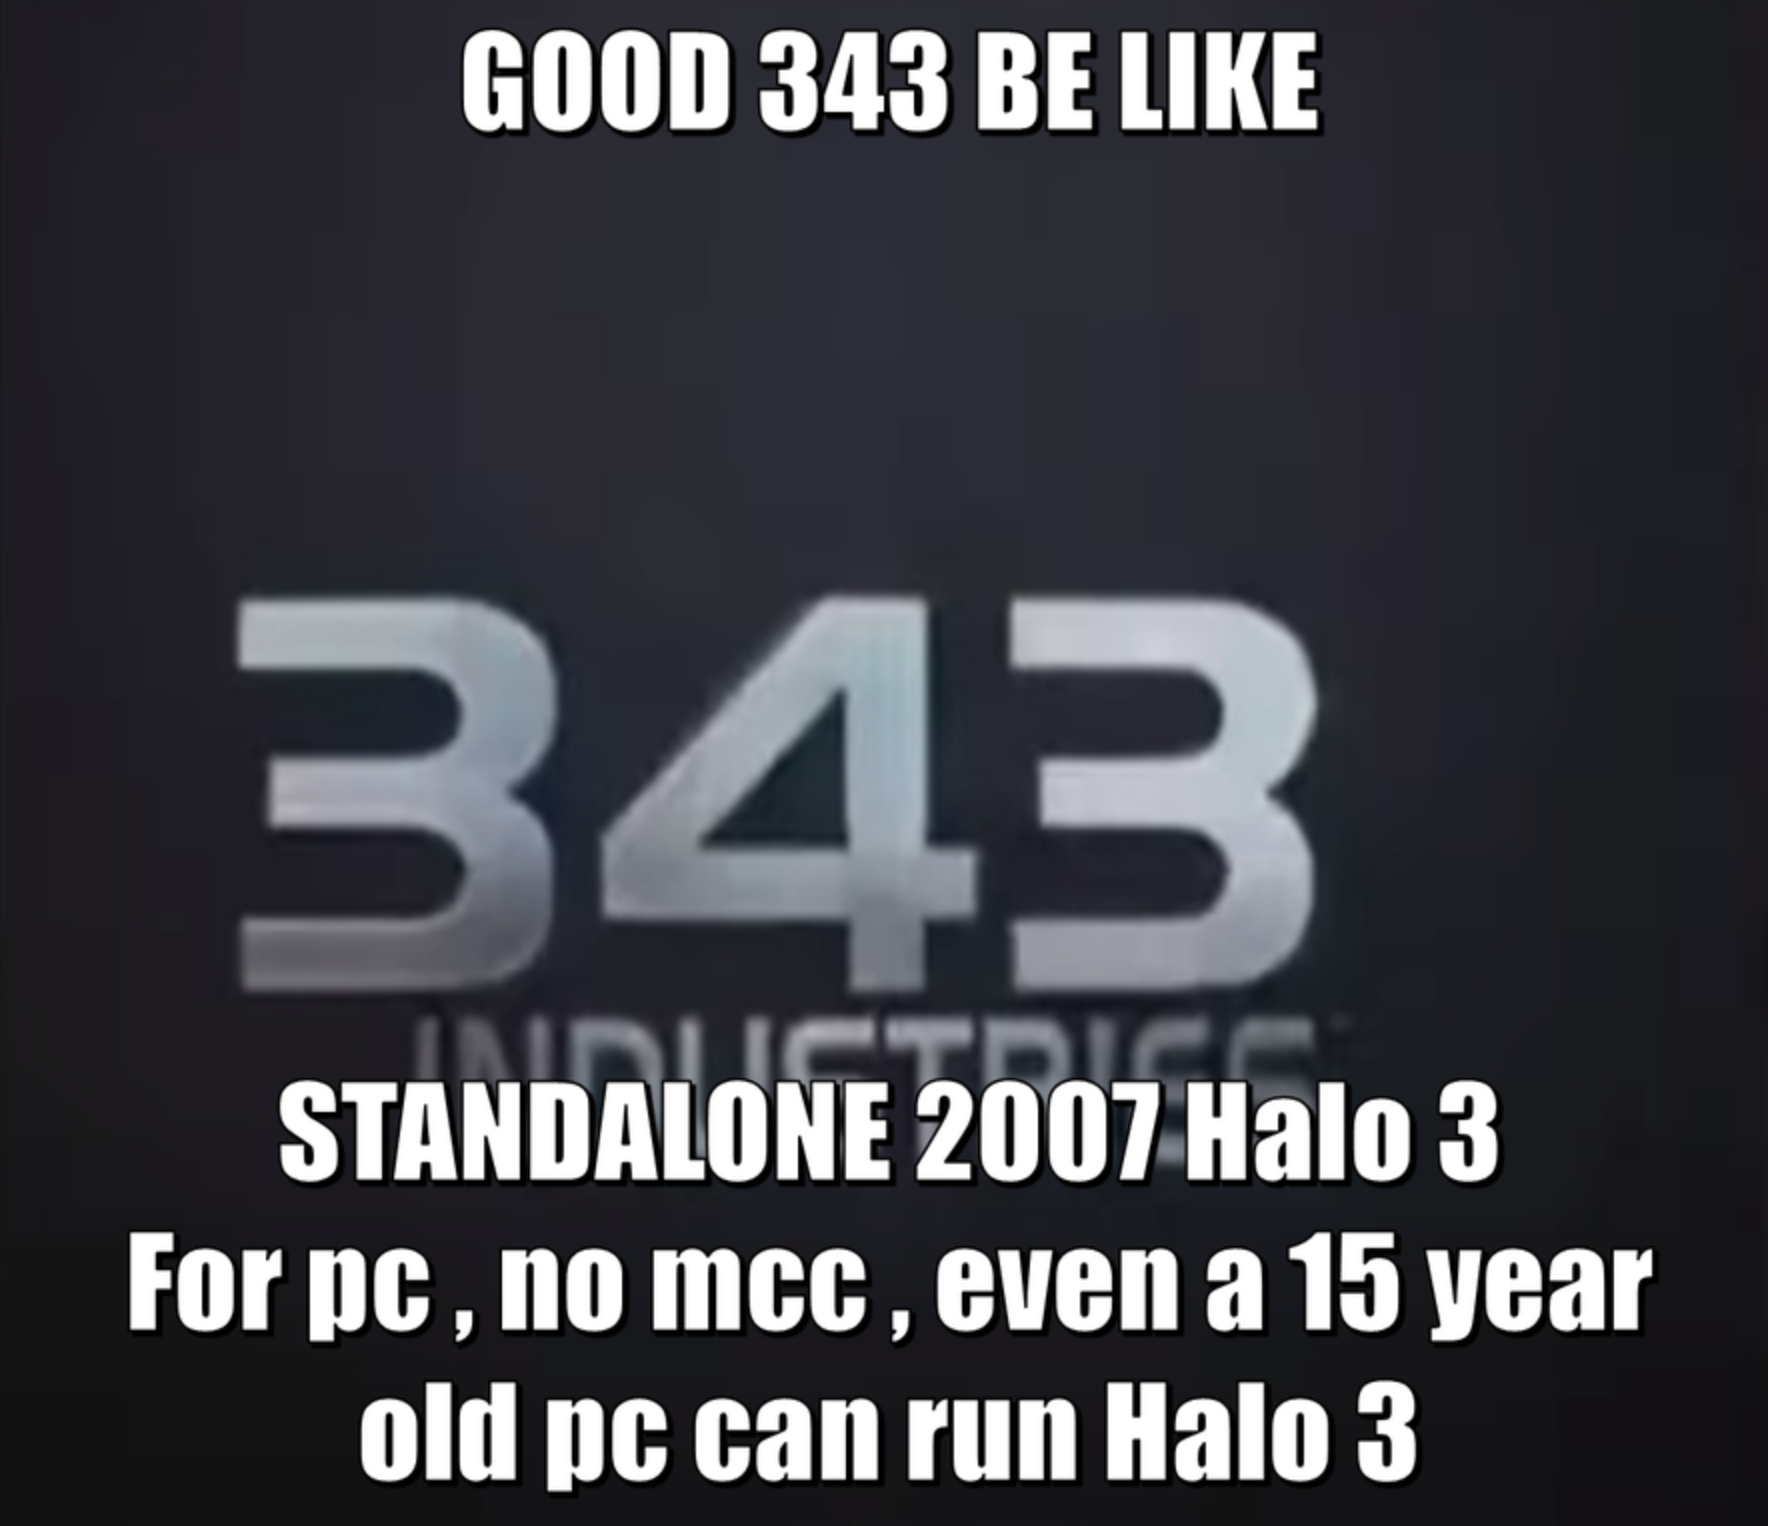 funny gaming memes - stand up - Good 343 Be 343 Standalone 2007 Halo 3 For pc, no mcc, even a 15 year old pc can run Halo 3